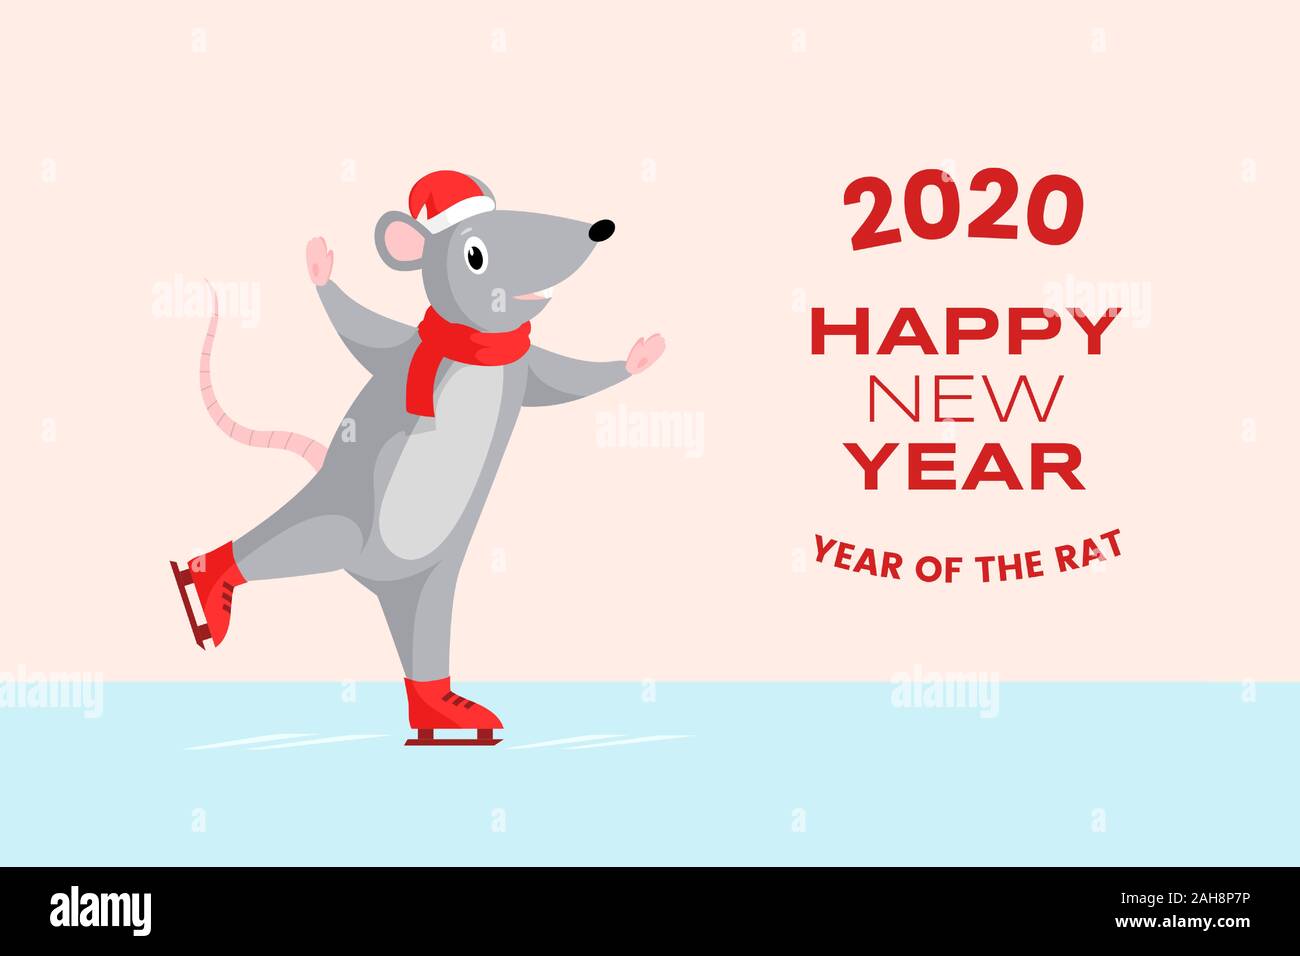 2020 happy New Year banner template. Greeting card design with cute rat skating on rink and red typographic inscription. Winter holiday postcard, horizontal poster layout with adorable mouse Stock Vector